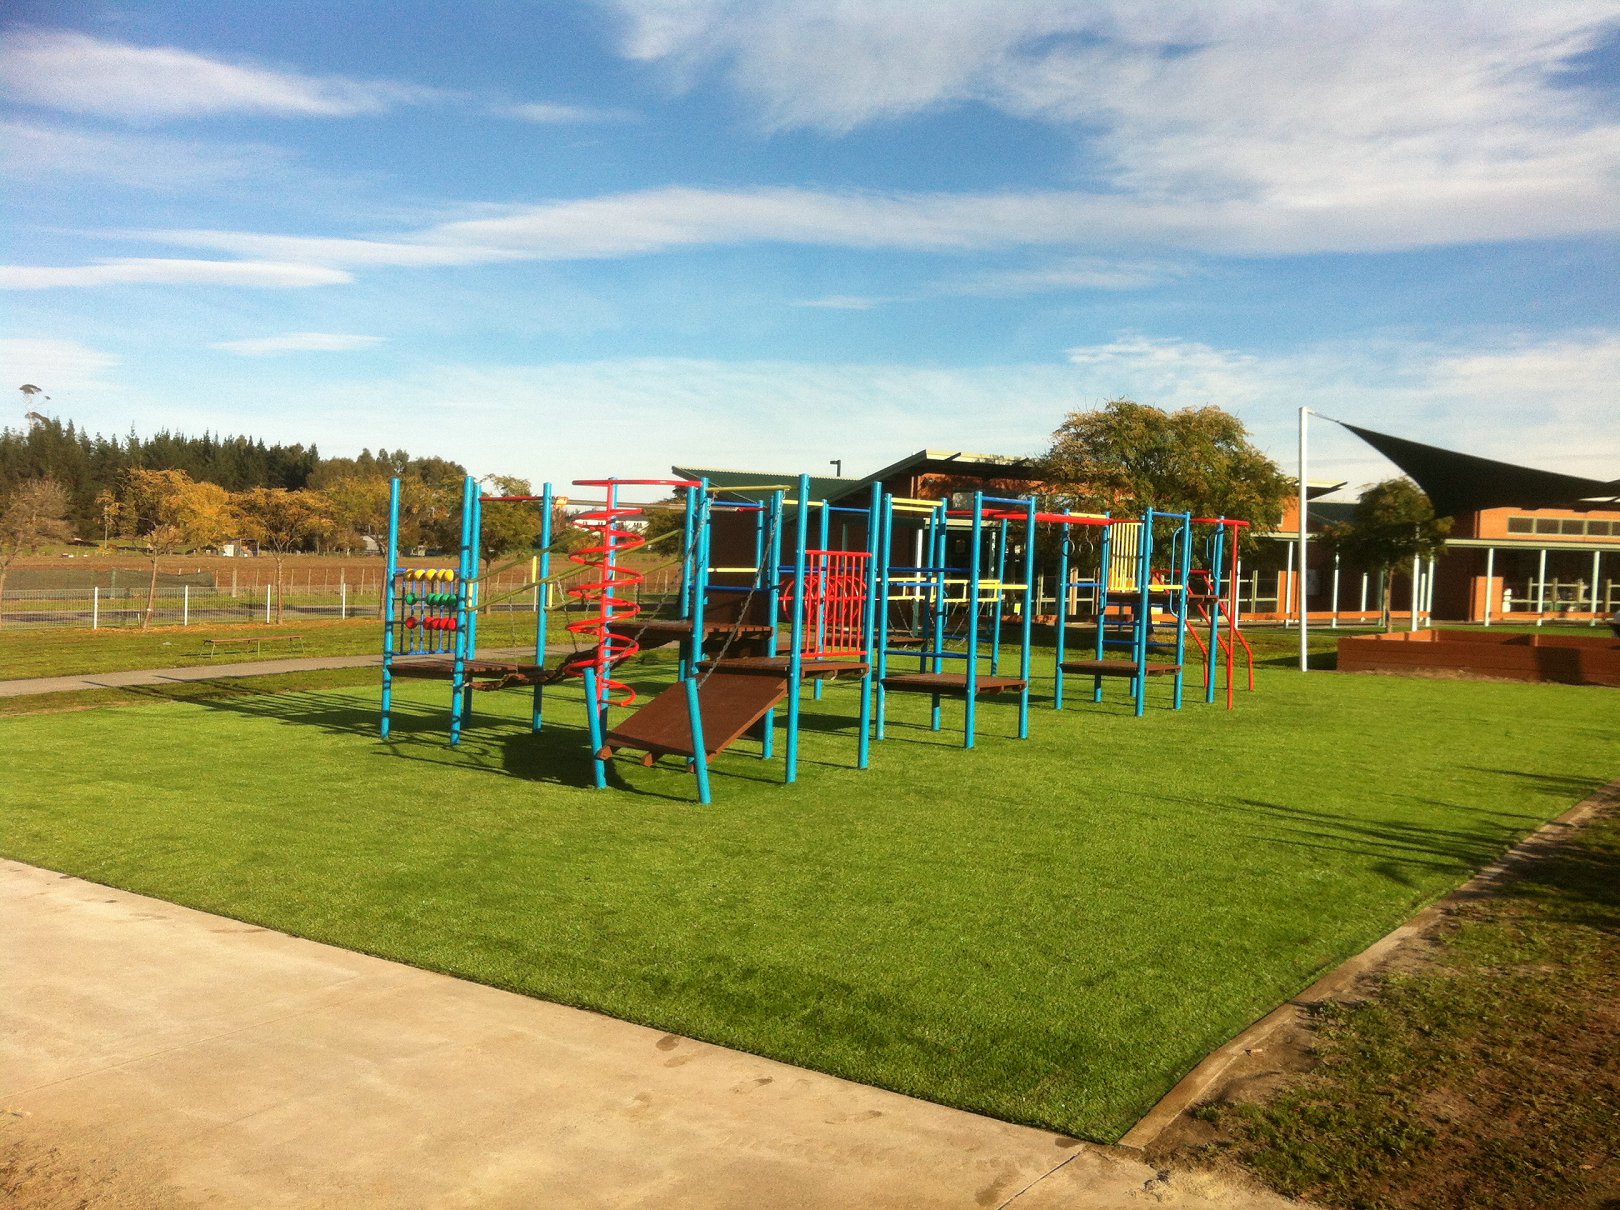 ARTIFICIAL TURF FOR PLAYGROUNDS IN SCHOOL